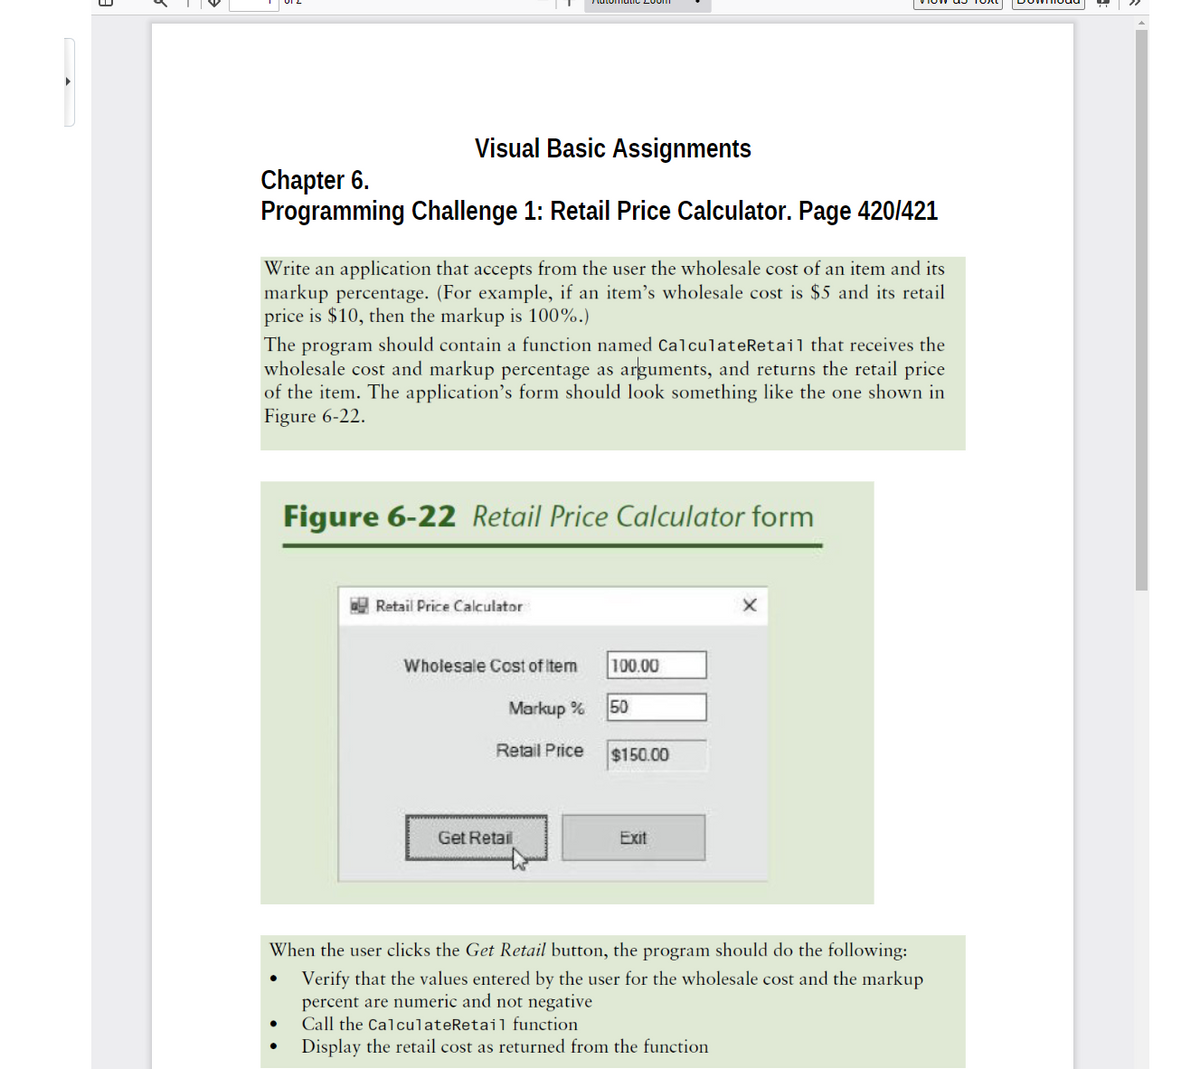 Visual Basic Assignments
Chapter 6.
Programming Challenge 1: Retail Price Calculator. Page 420/421
Write an application that accepts from the user the wholesale cost of an item and its
markup percentage. (For example, if an item's wholesale cost is $5 and its retail
price is $10, then the markup is 100%.)
The program should contain a function named CalculateRetail that receives the
wholesale cost and markup percentage as arguments, and returns the retail price
of the item. The application's form should look something like the one shown in
Figure 6-22.
Figure 6-22 Retail Price Calculator form
Retail Price Calculator
Wholesale Cost of item
100.00
Markup %
50
Retail Price
$150.00
Get Retail
Exit
When the user clicks the Get Retail button, the program should do the following:
Verify that the values entered by the user for the wholesale cost and the markup
percent are numeric and not negative
Call the CalculateRetail function
Display the retail cost as returned from the function
